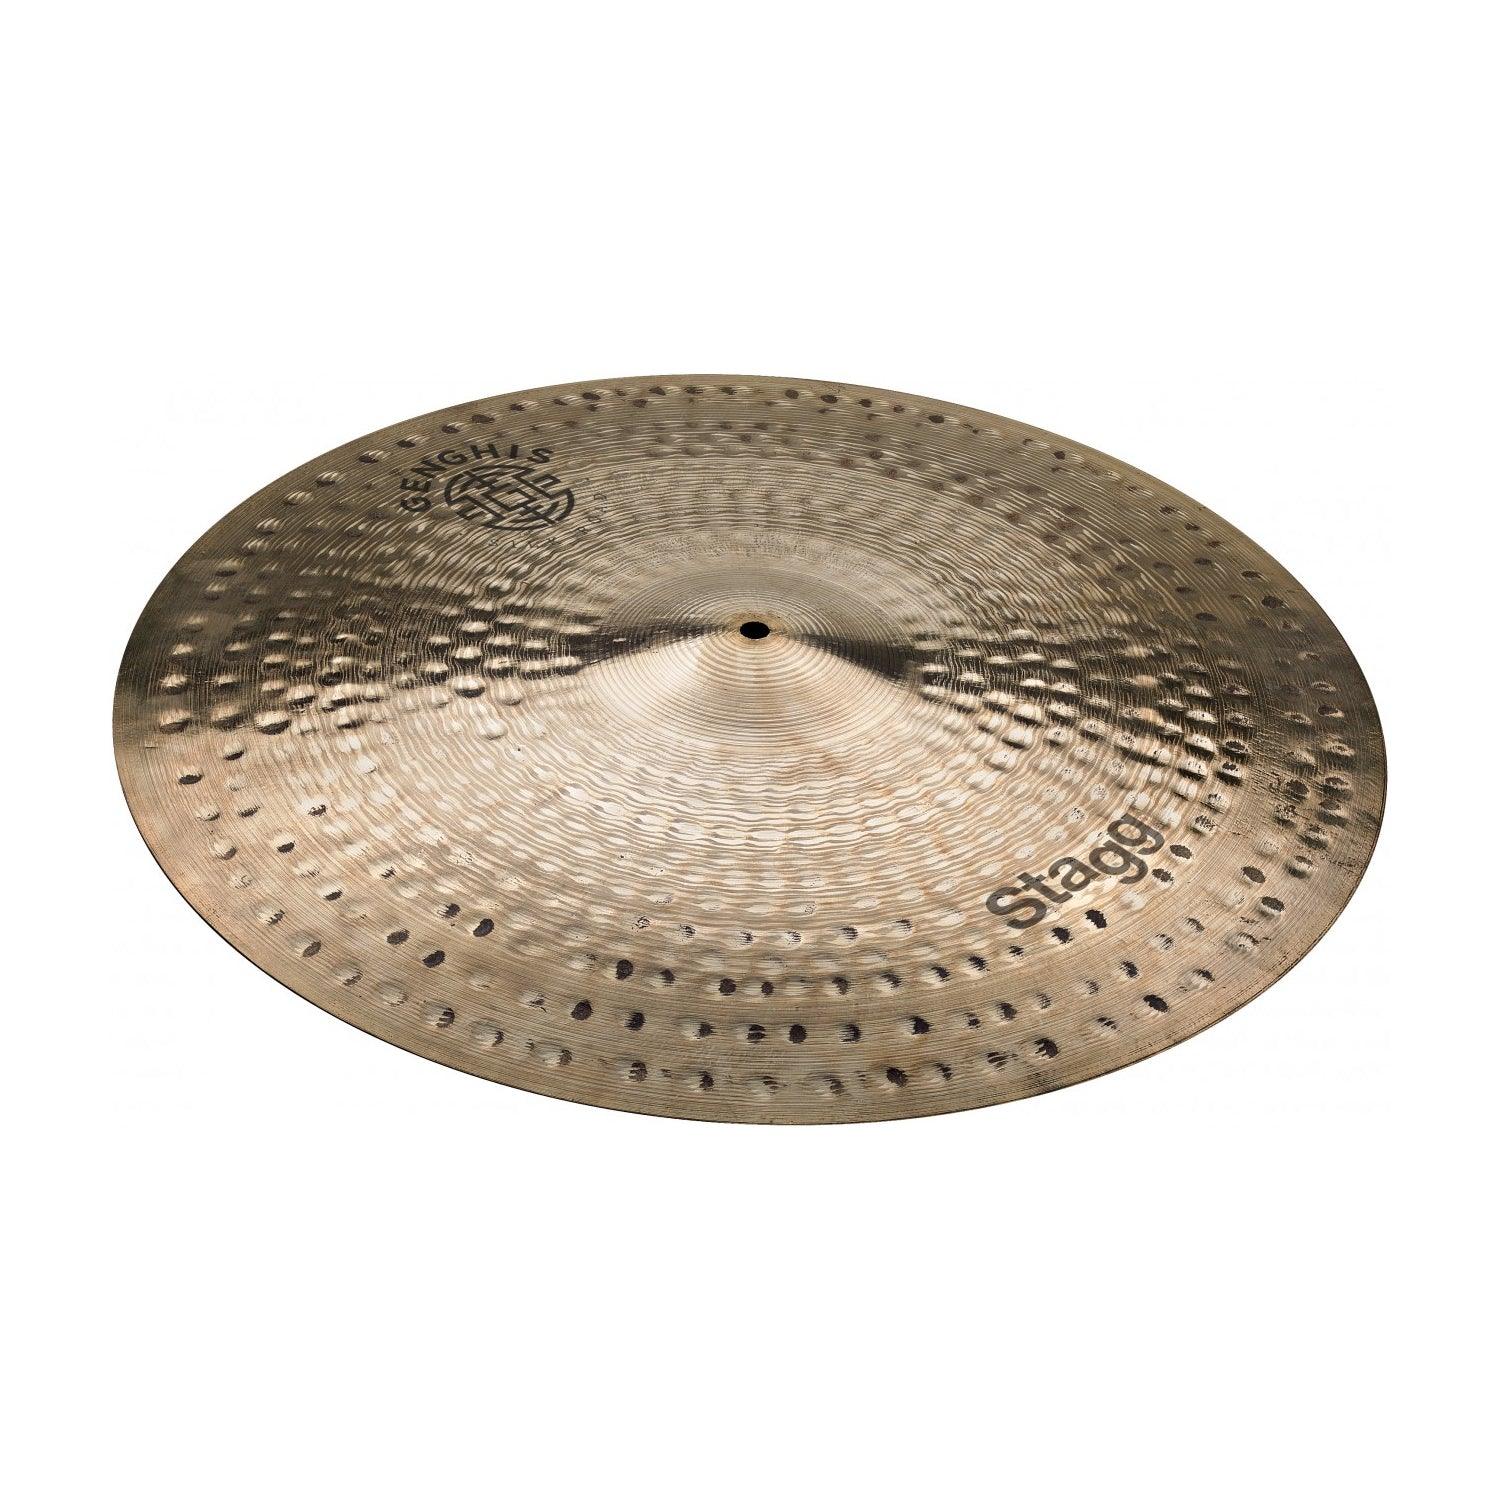 Stagg GENG-RM22R 22" Genghis medium ride Cymbal - DY Pro Audio